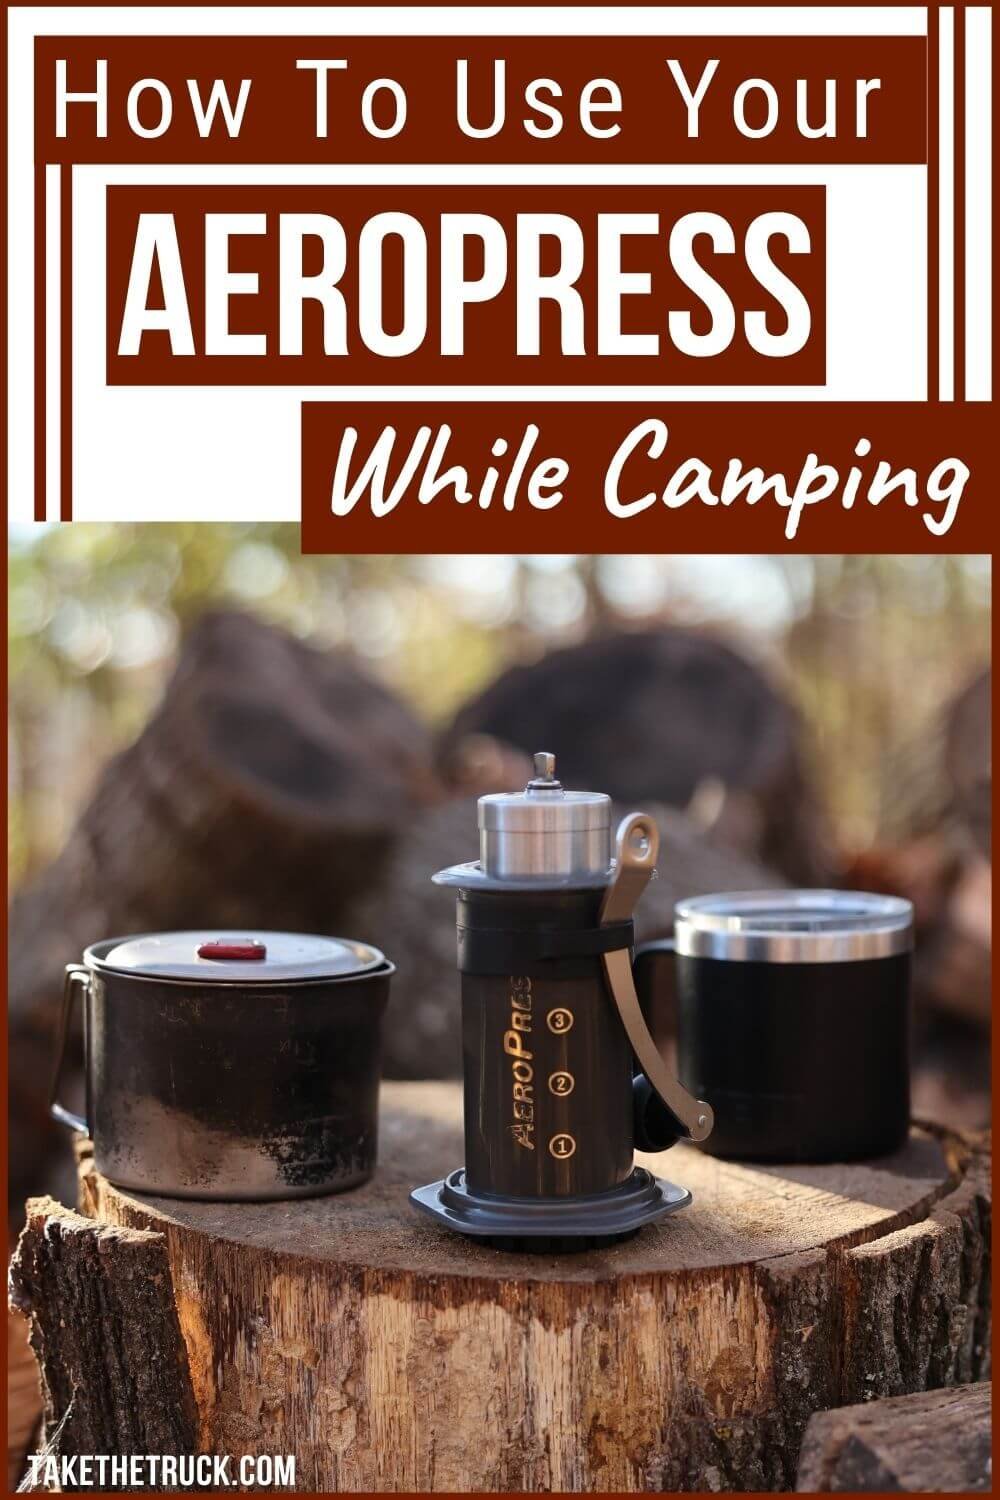 Learn how to use an aeropress to make camping coffee. This post has info about the Aeropress and Aeropress Go when using an Aeropress for coffee while camping. Aeropress camping